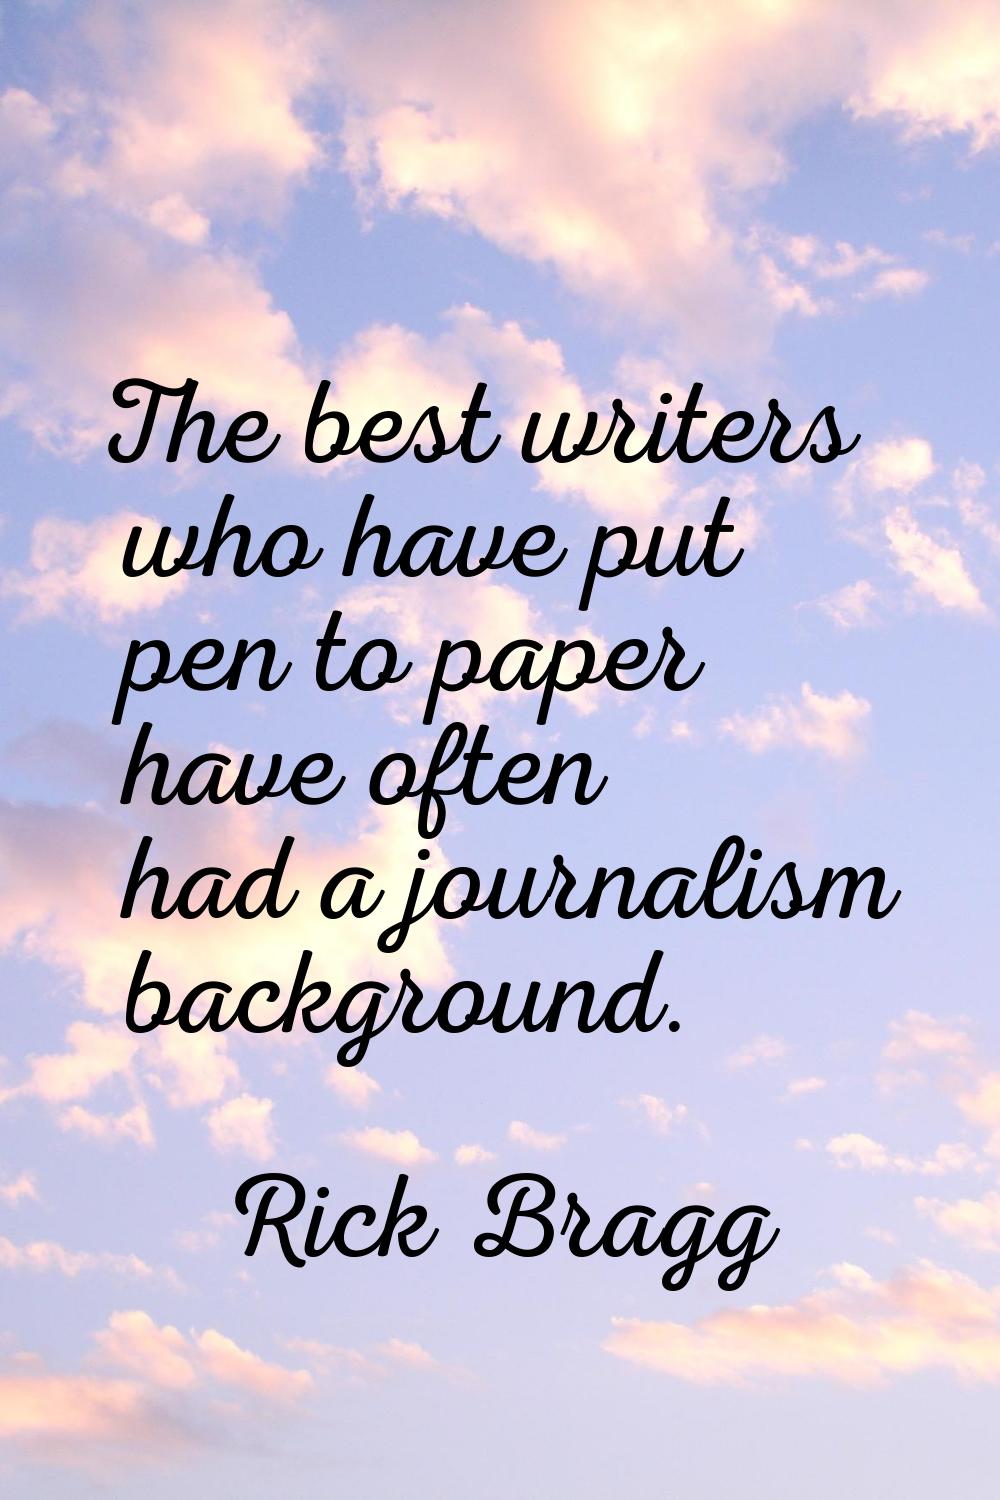 The best writers who have put pen to paper have often had a journalism background.